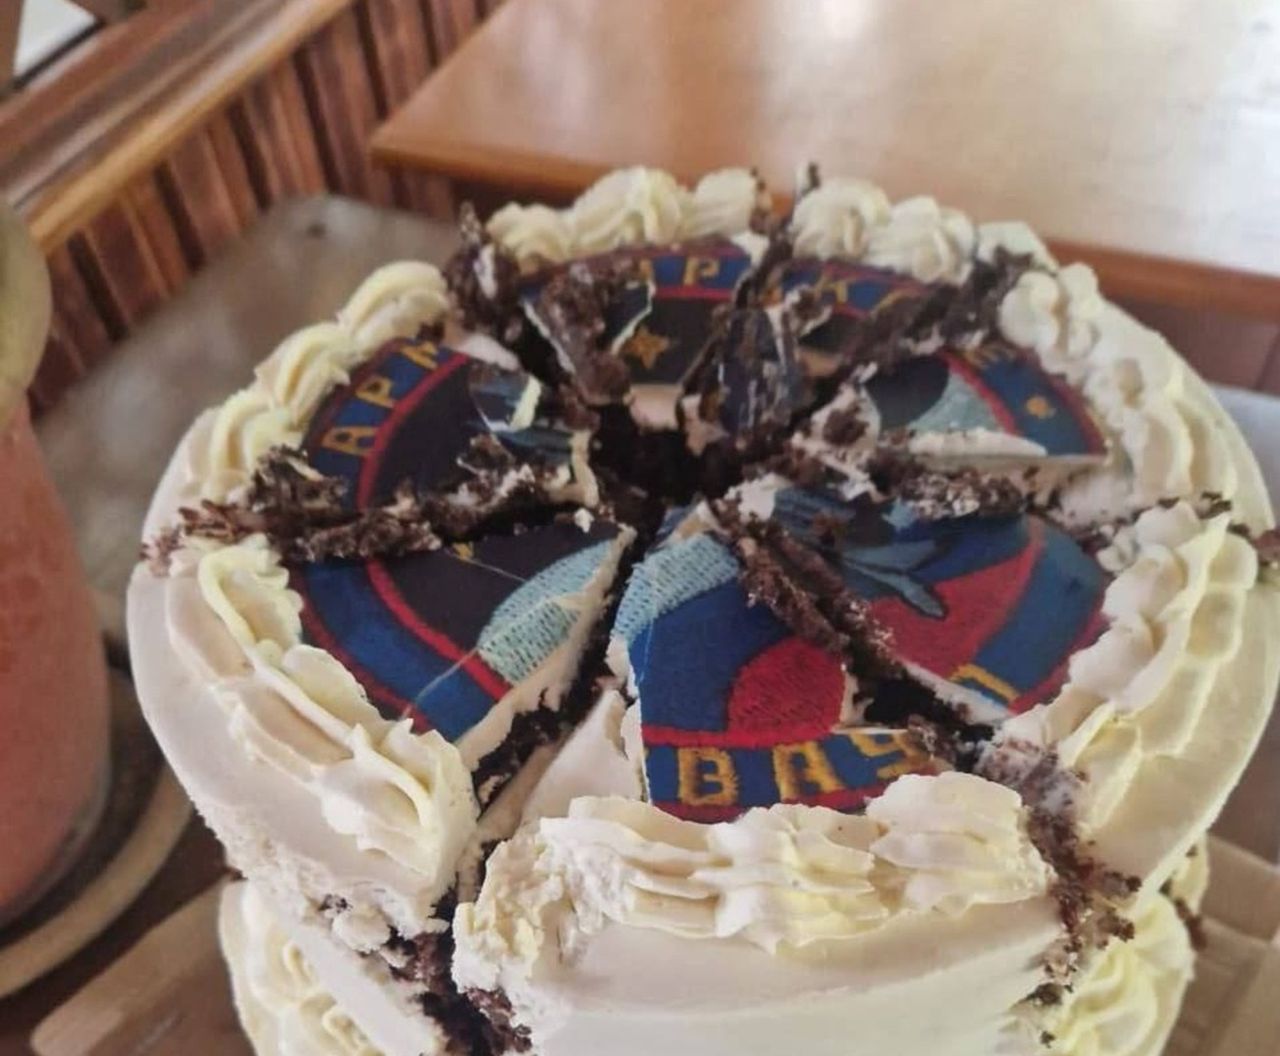 Russian pilots received cake and vodka. It was a trap